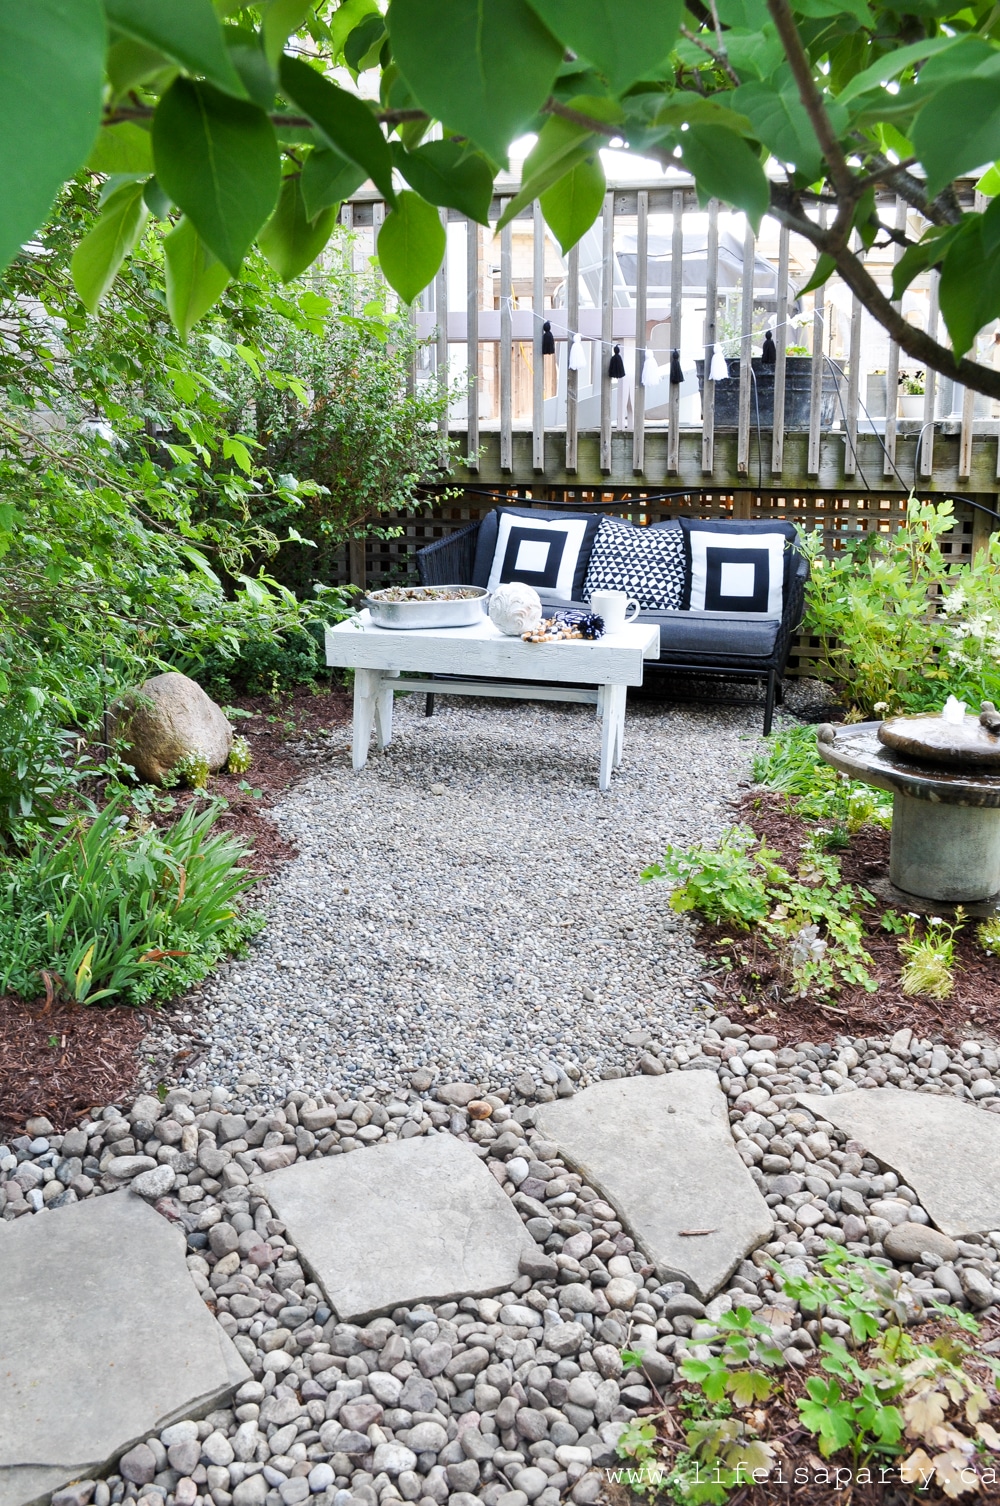 pea gravel seating area in a small garden